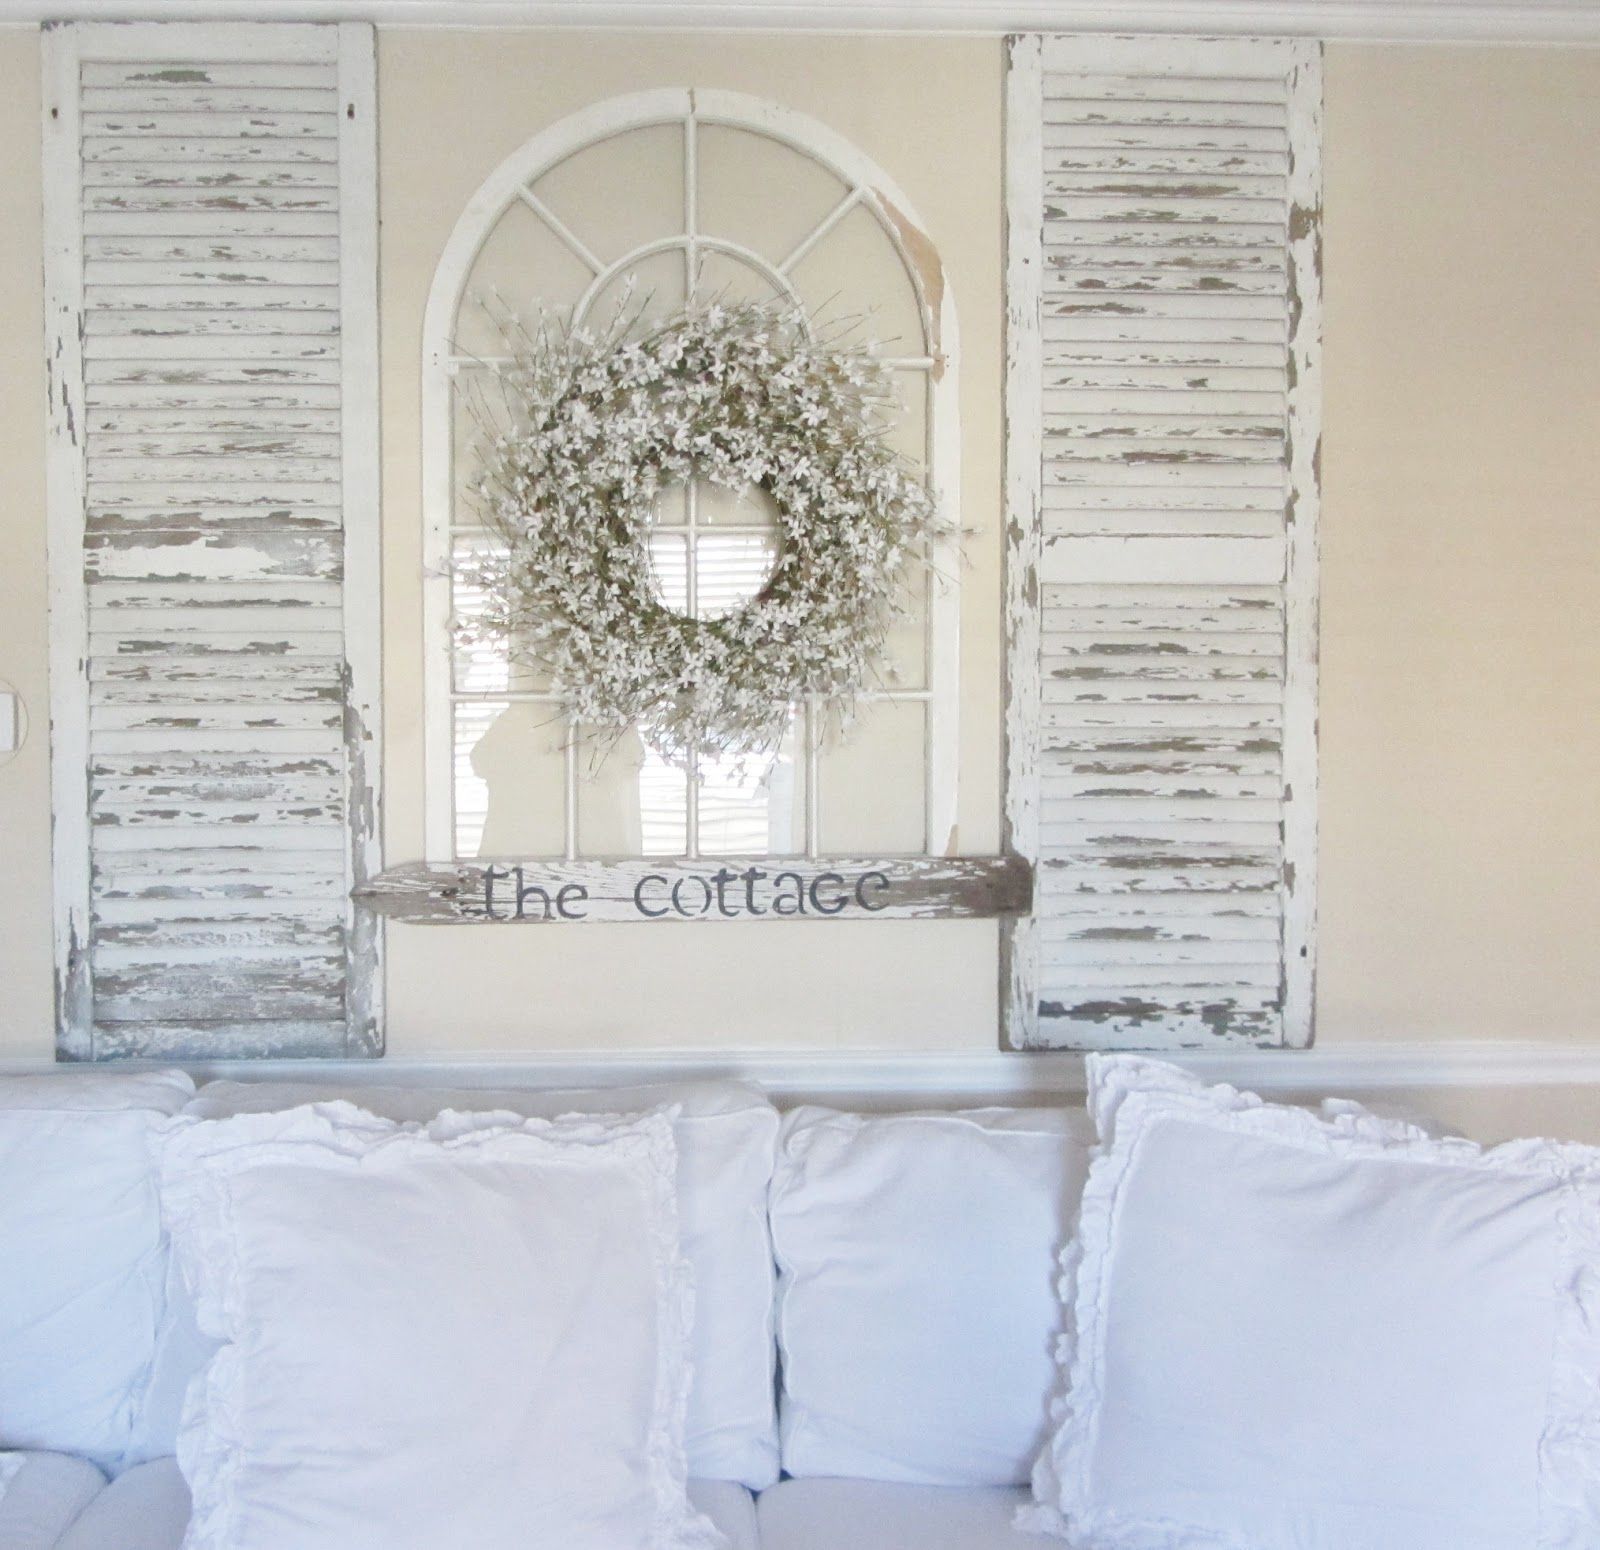 Decorating With Old Shutters | Taking| Taking Old Shutters Intended For Shutter Window Hanging Wall Decor (View 3 of 30)